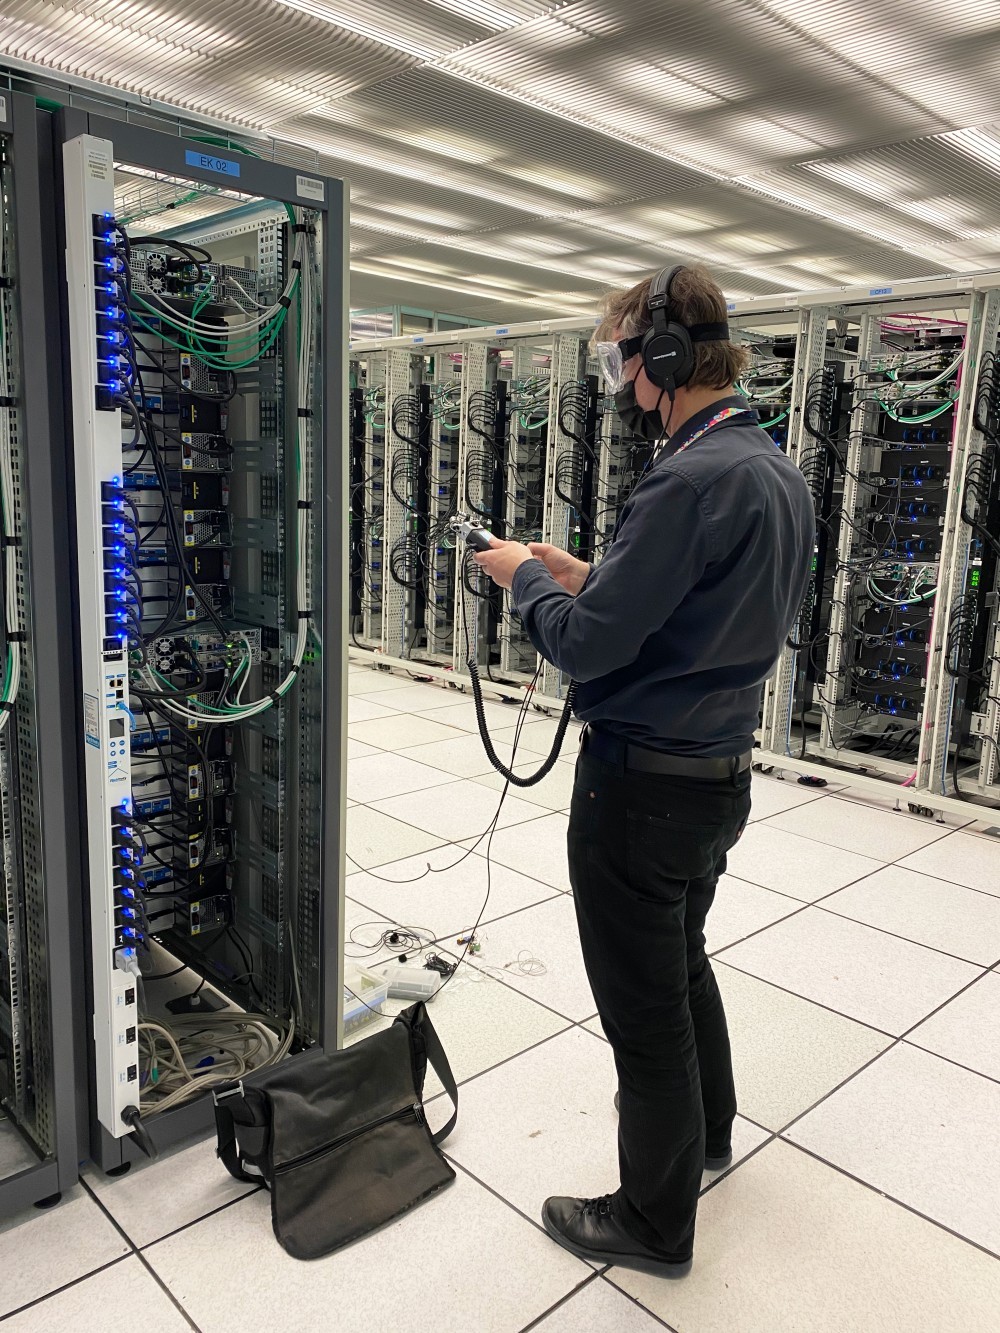 Erich Berger doing sound recording at the Data Centre